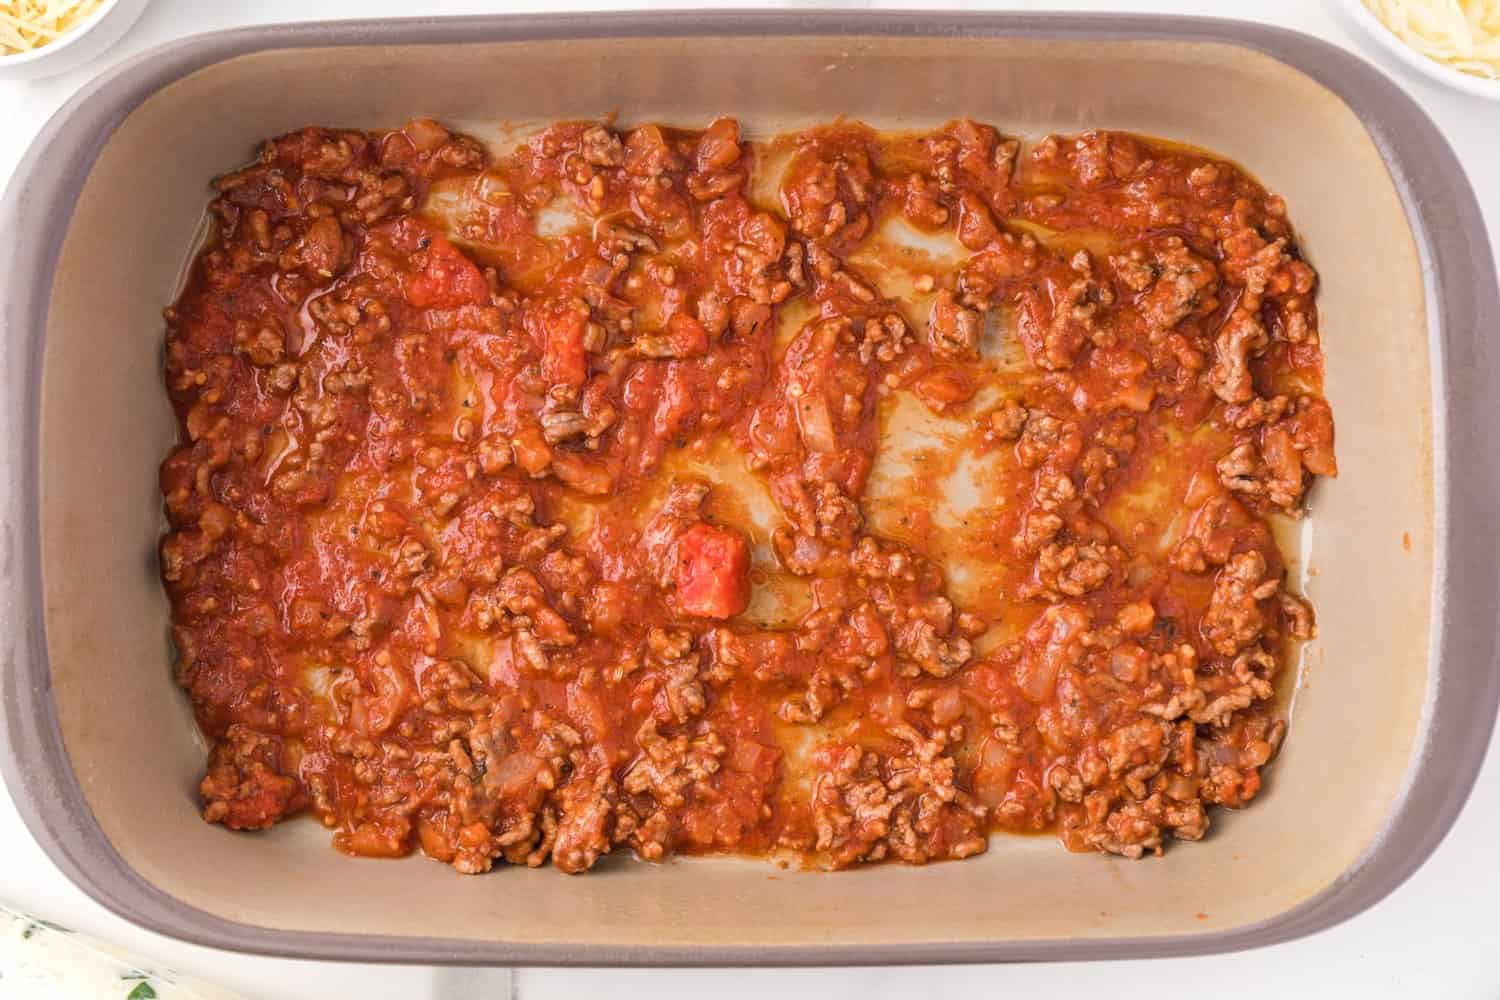 Meat sauce in the bottom of the pan.